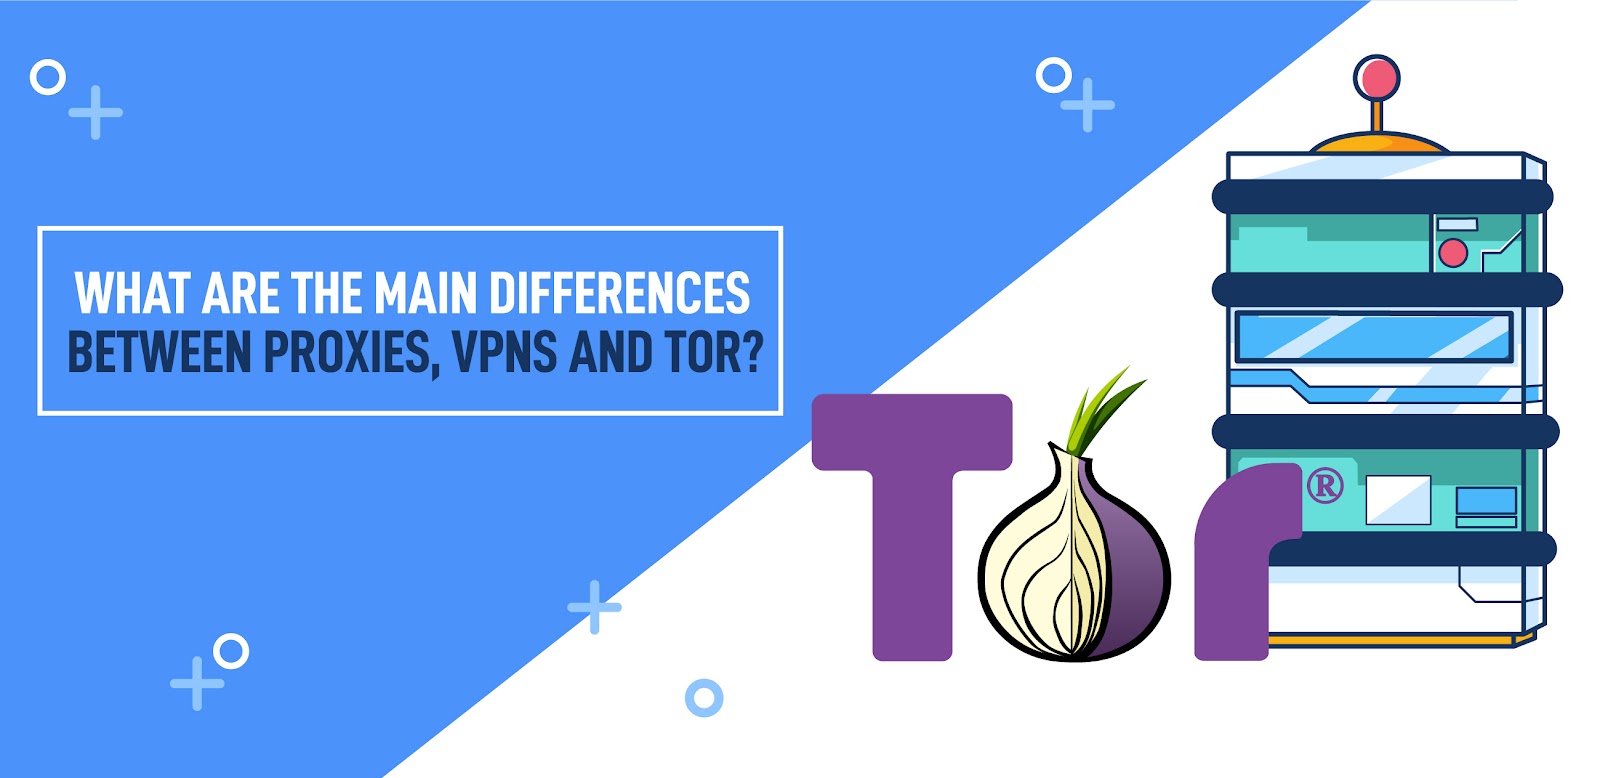 Proxy vs VPN: What are the main differences?